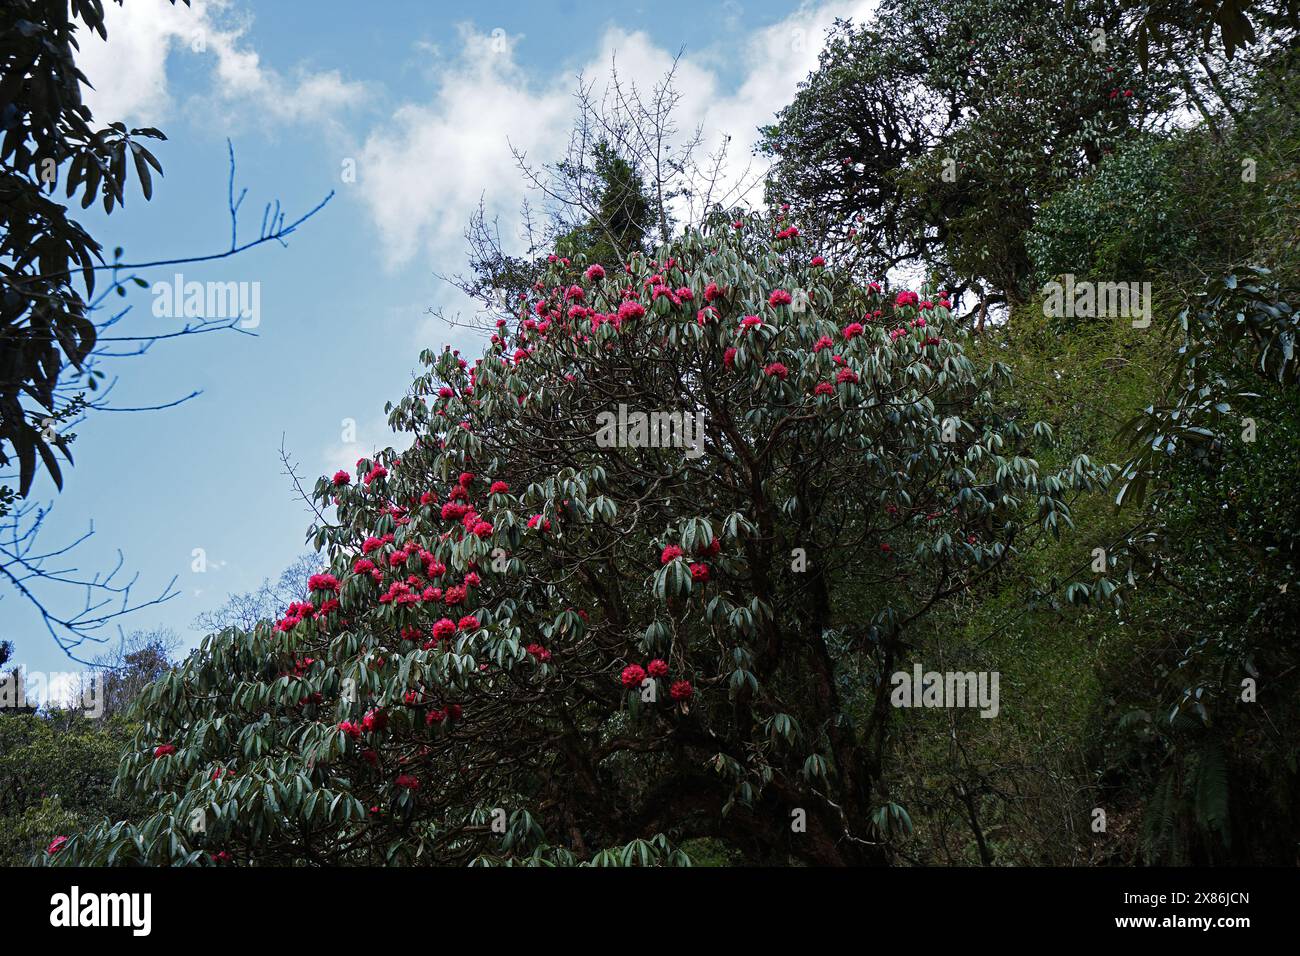 Natural landscape of blooming Rhododendron(Azalea) plant- one of the largest shrubs in genus Ericaceae family well known as evergreen leaves- Nepal Stock Photo